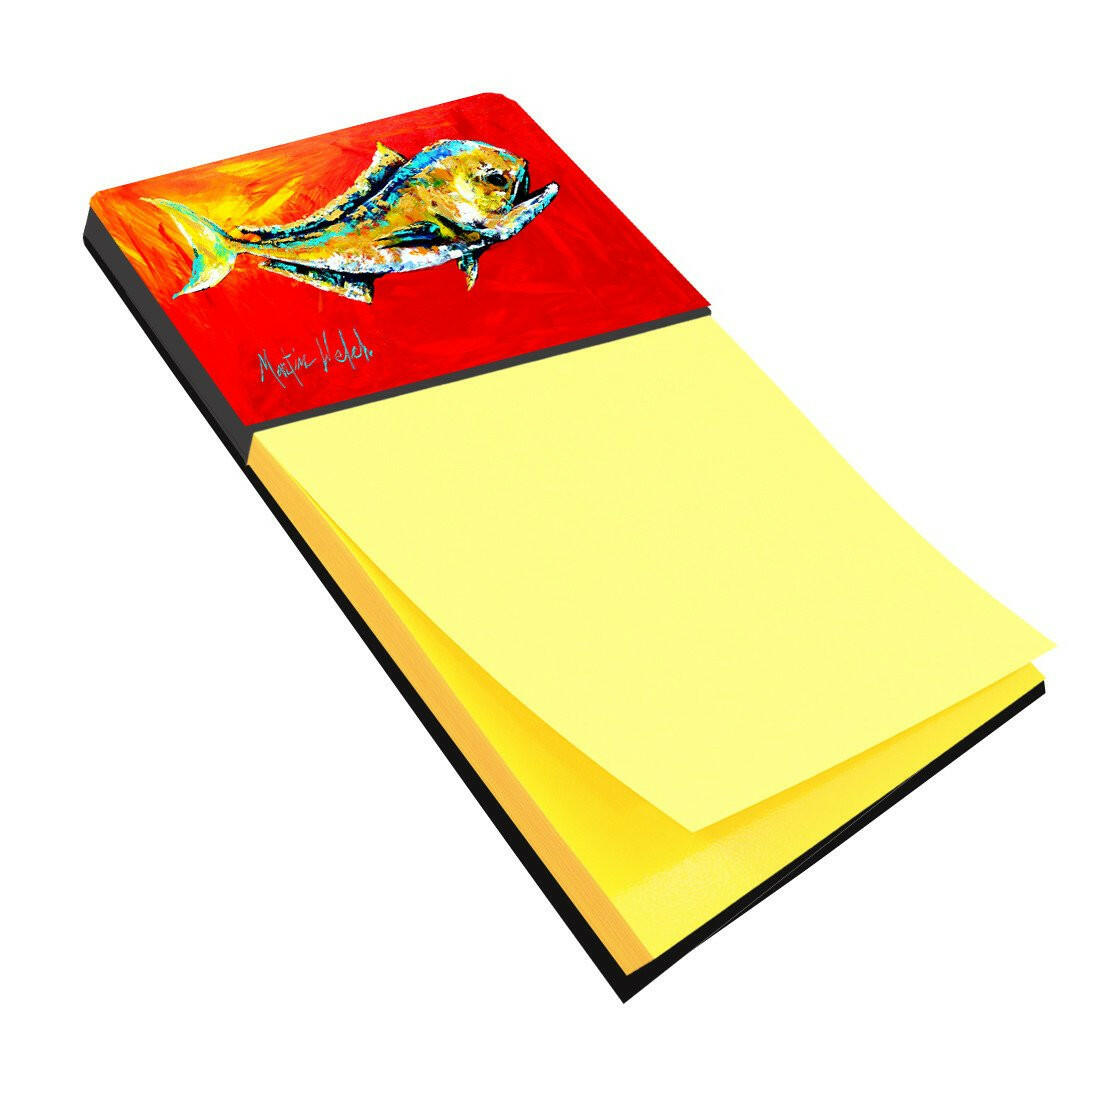 Danny Dolphin Fish Refiillable Sticky Note Holder or Postit Note Dispenser MW1156SN by Caroline's Treasures